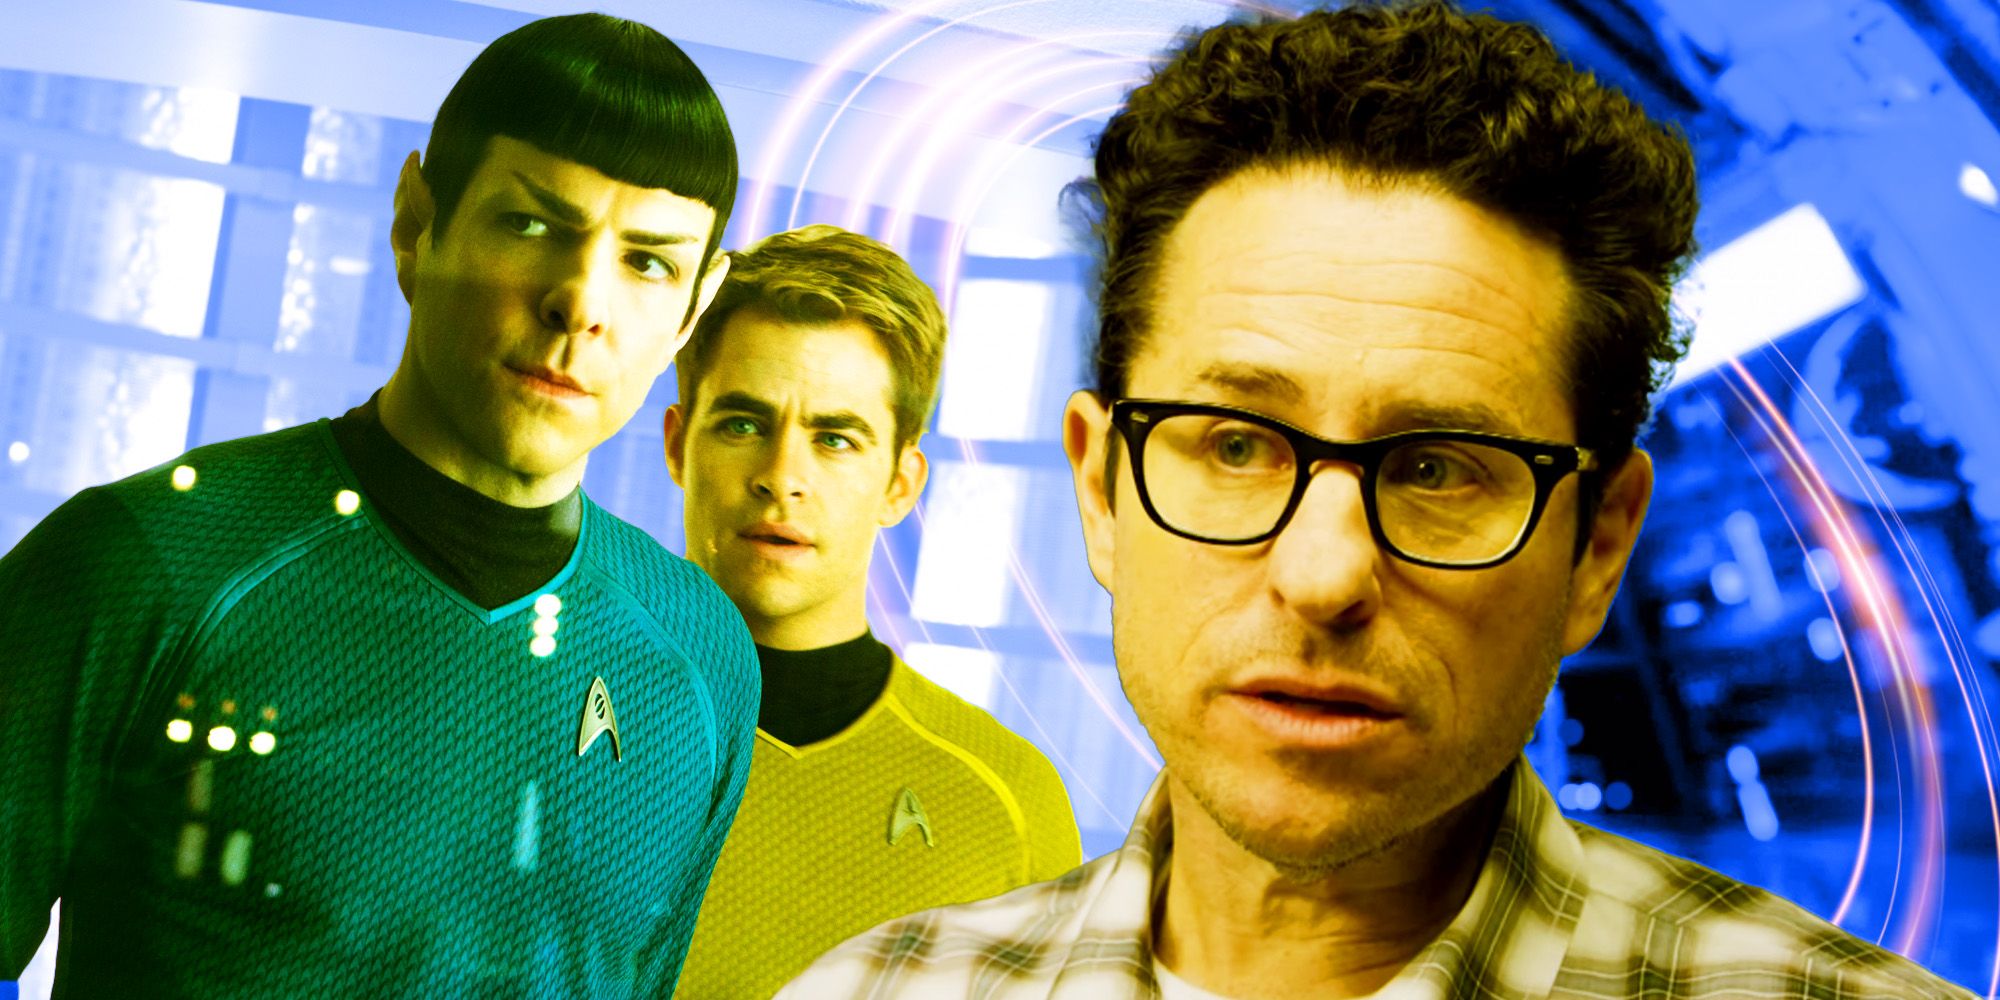 JJ Abrams with Spock and Kirk from Star Trek Into Darkness